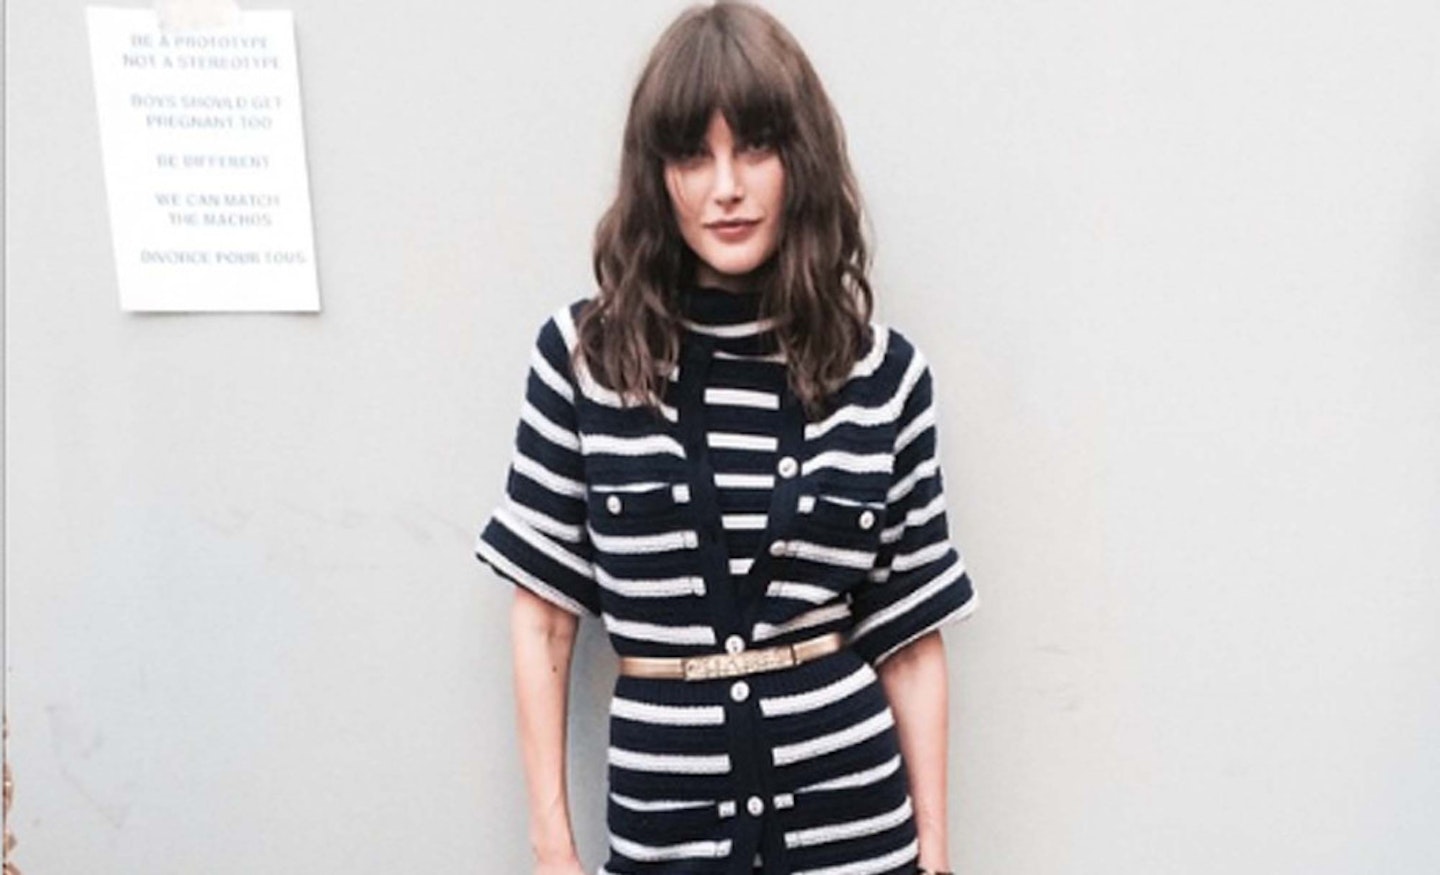 @thesocietynyc: Getting stripey with Cat Mcneil